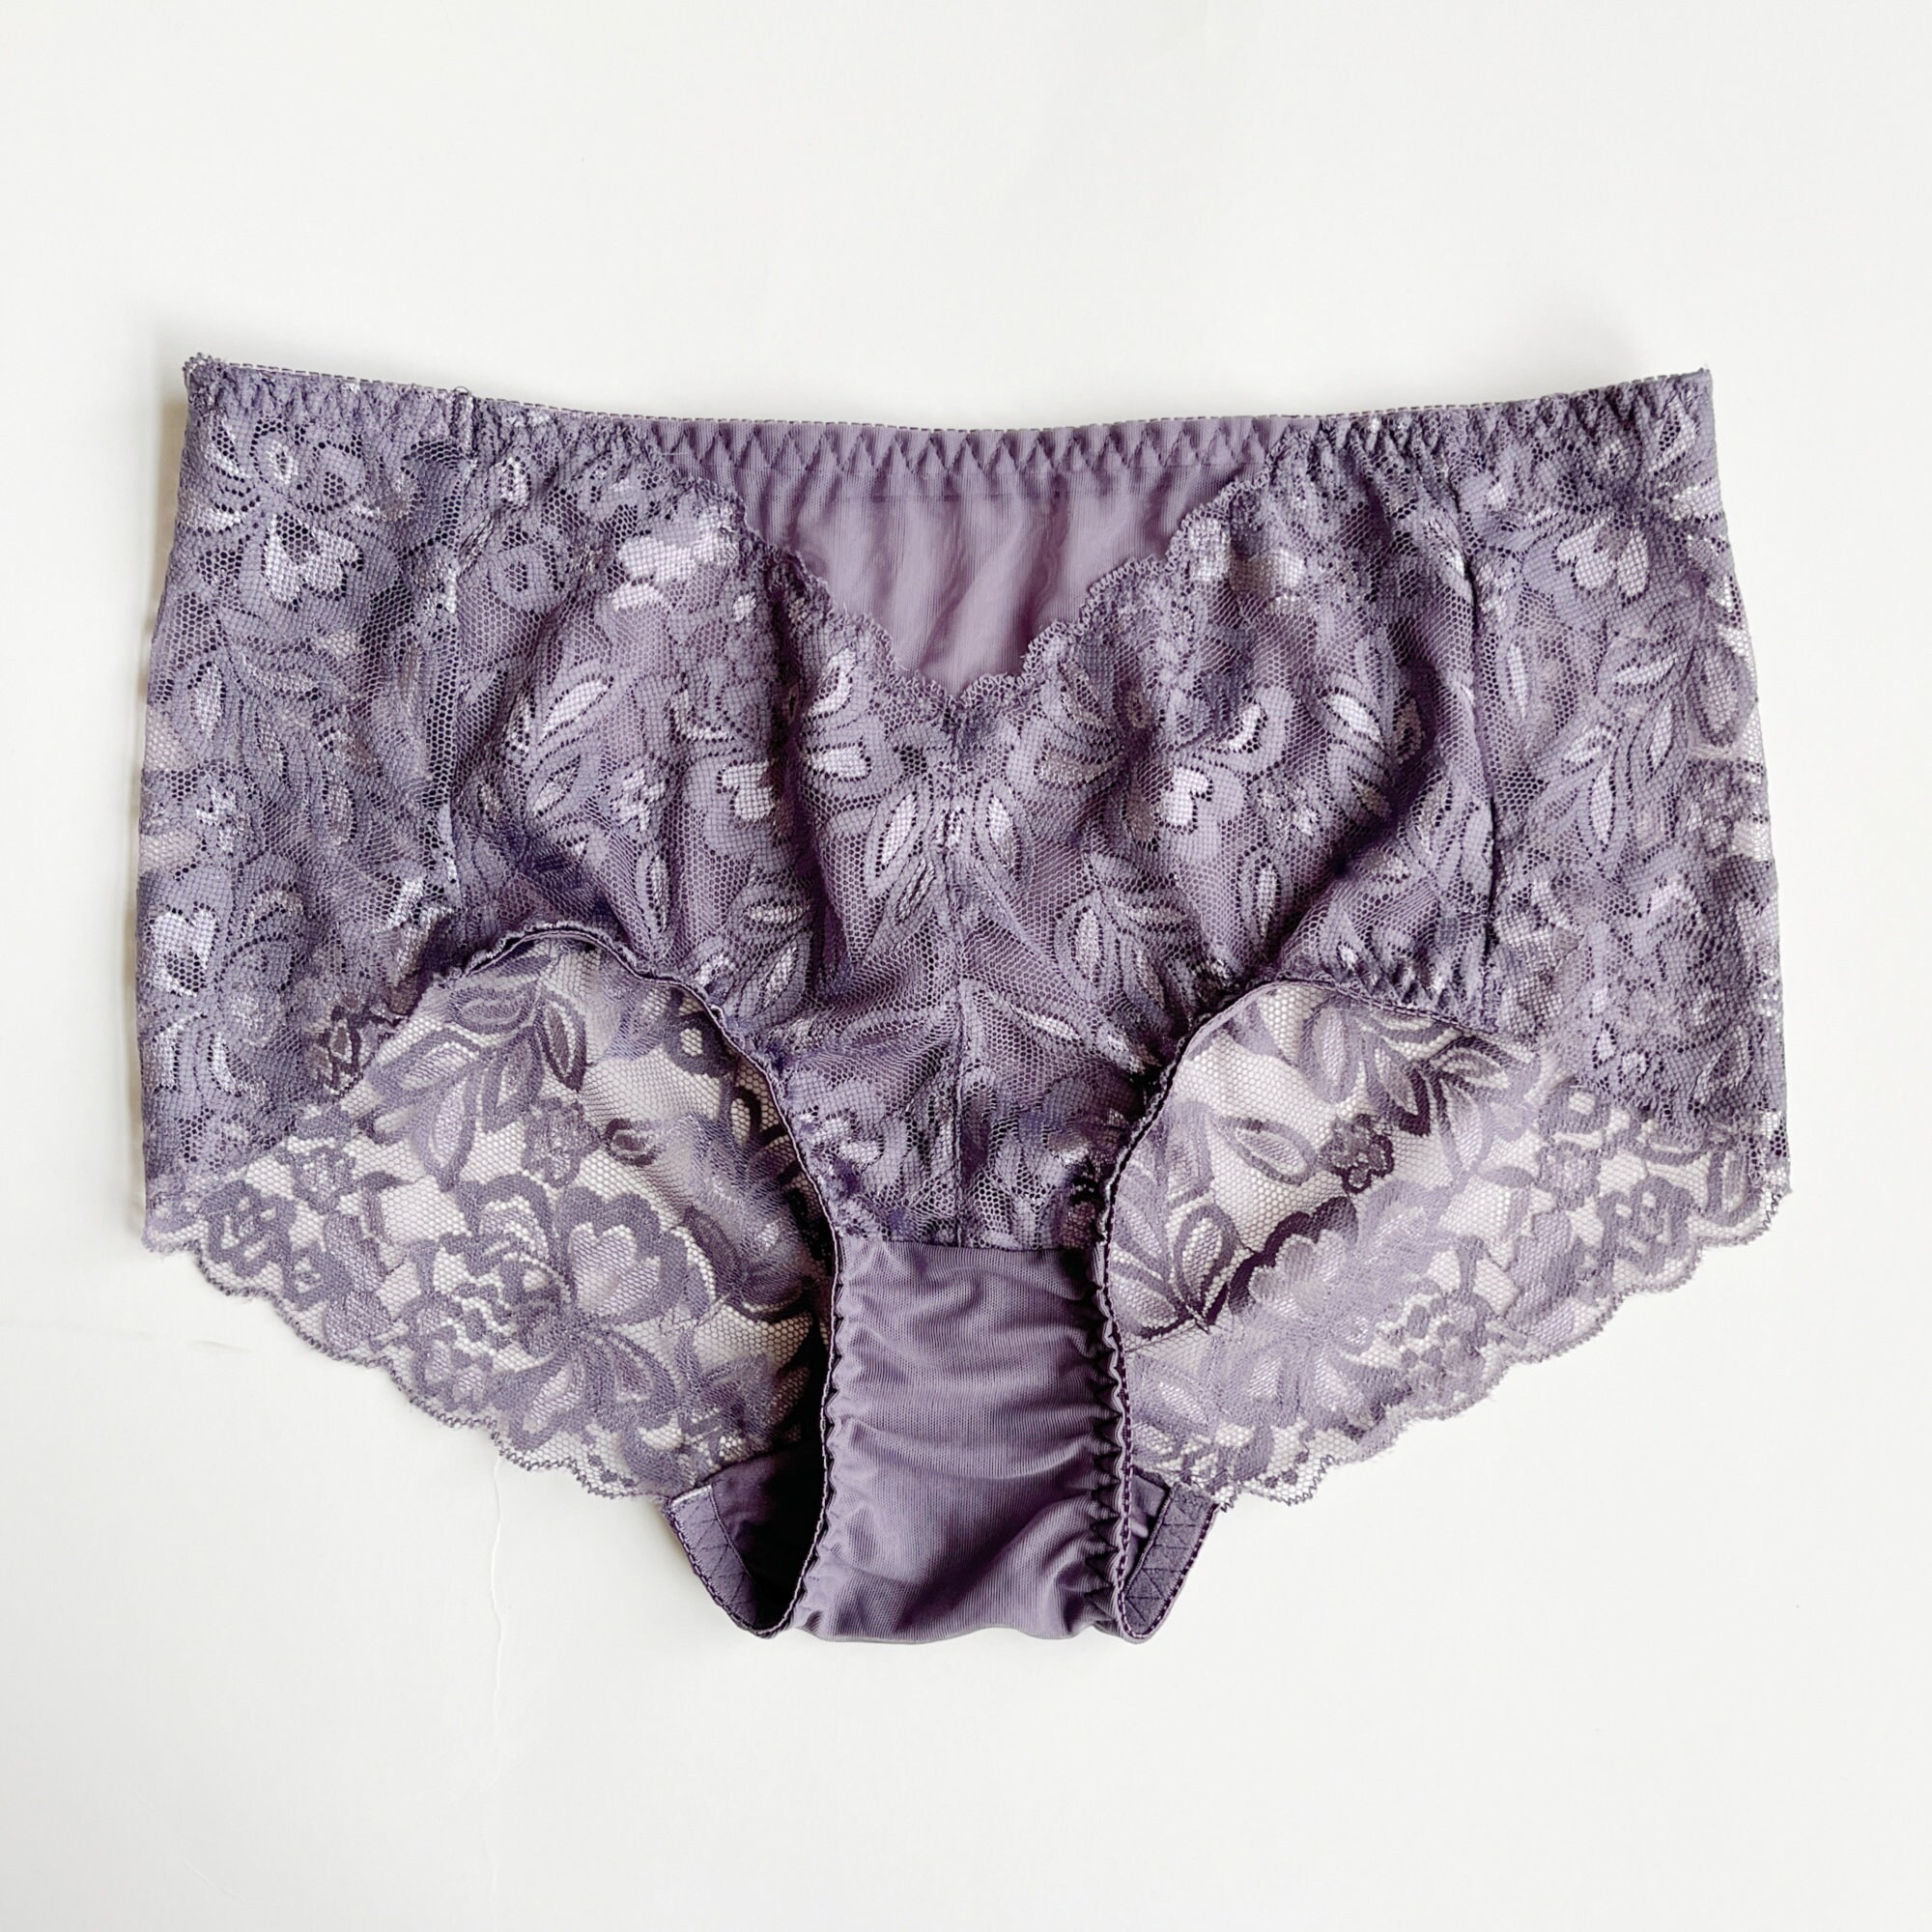 Scalloped Lace Silk Panties Full Coverage Lace Underwear Briefs